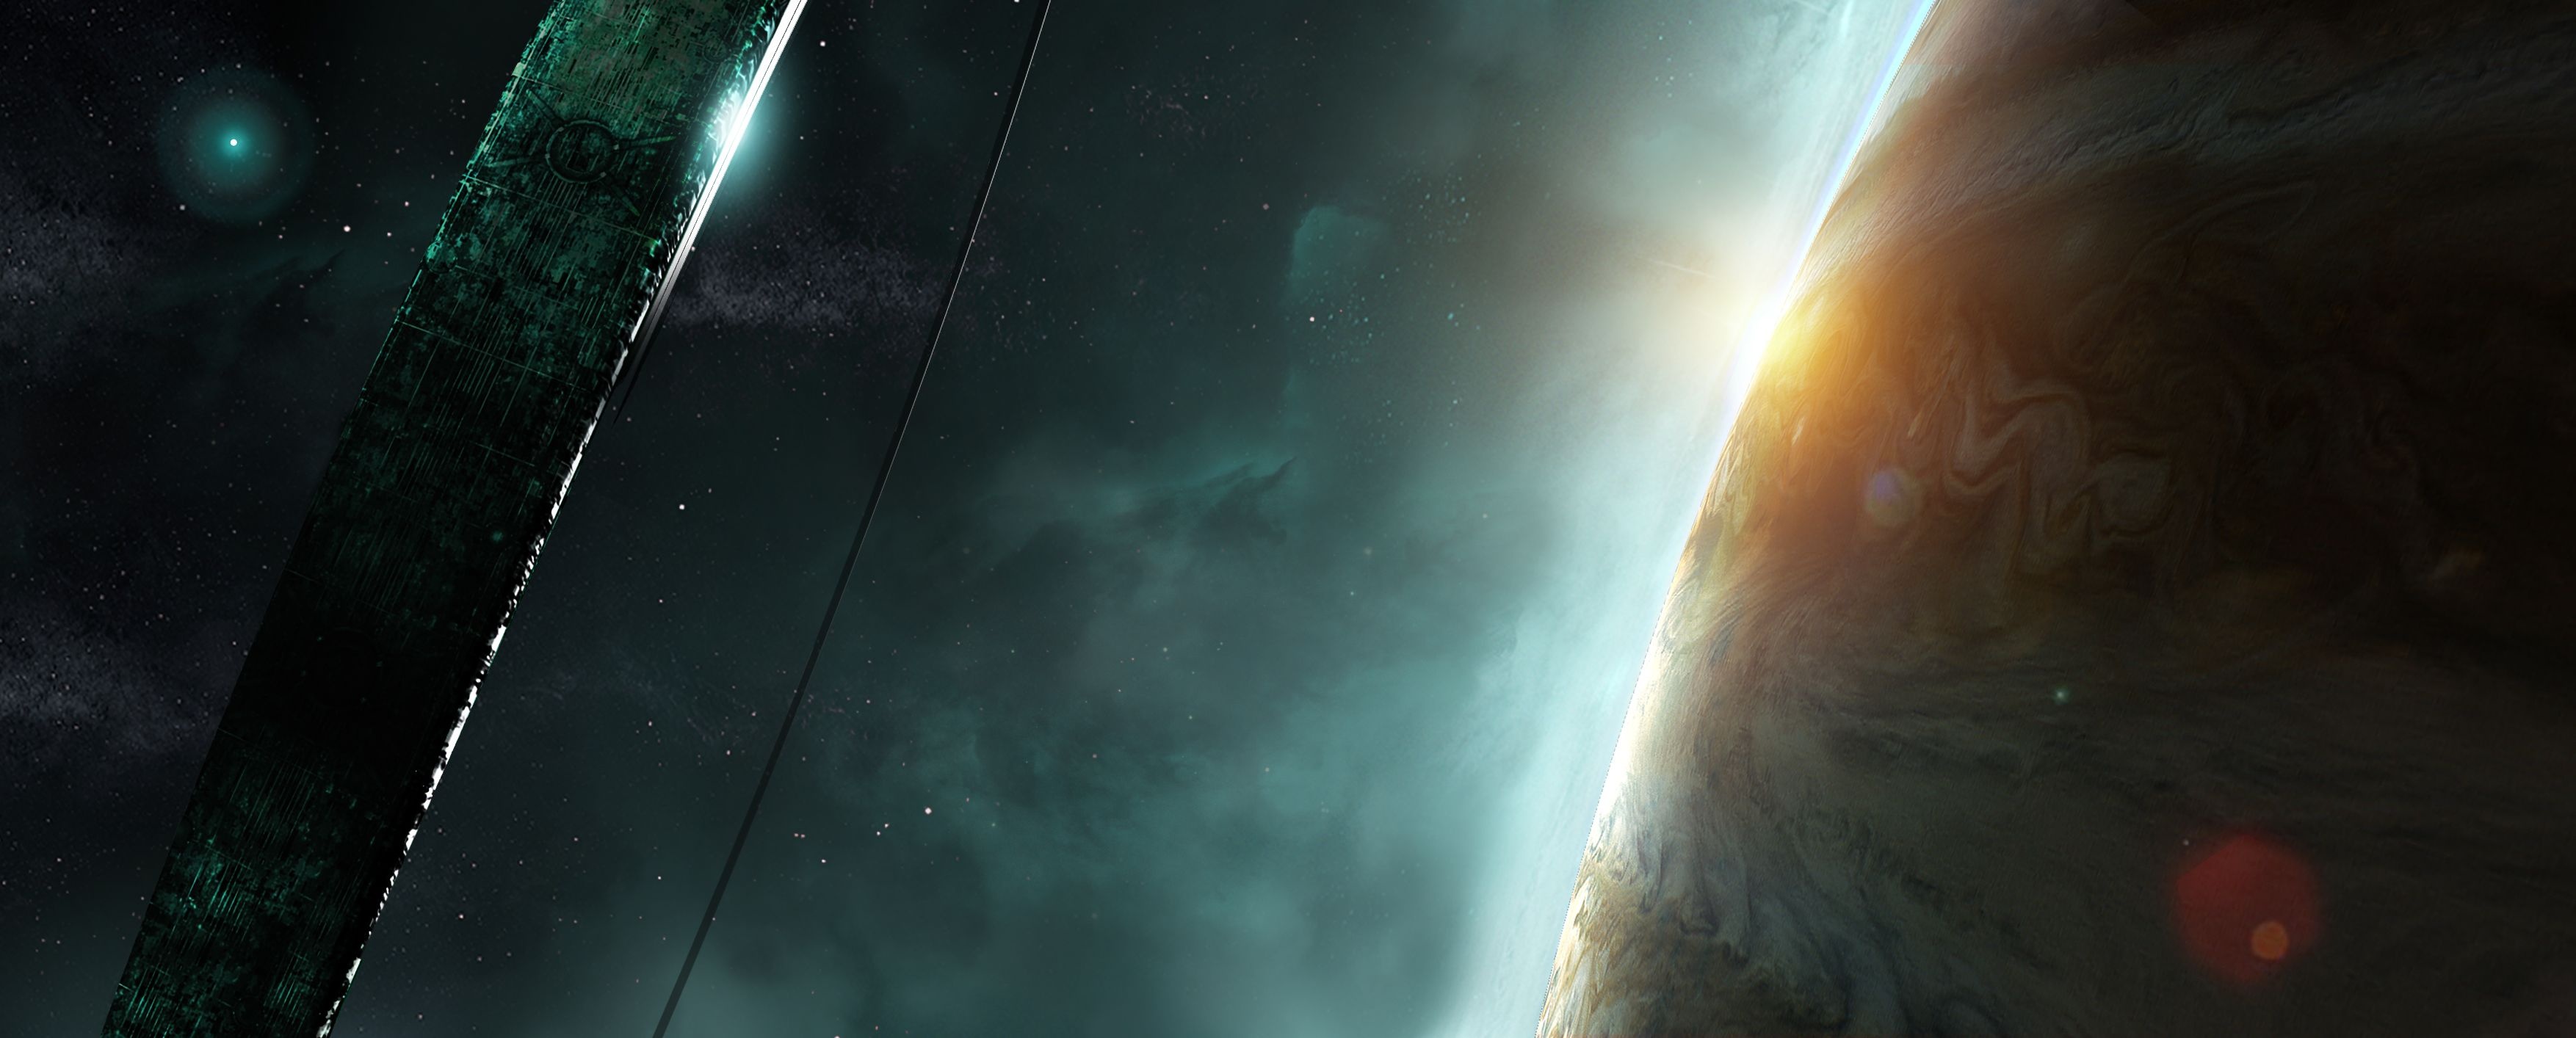 Halo Ring, Dual monitor wallpapers, Expansive view, Surrounding immersion, 3510x1420 Dual Screen Desktop